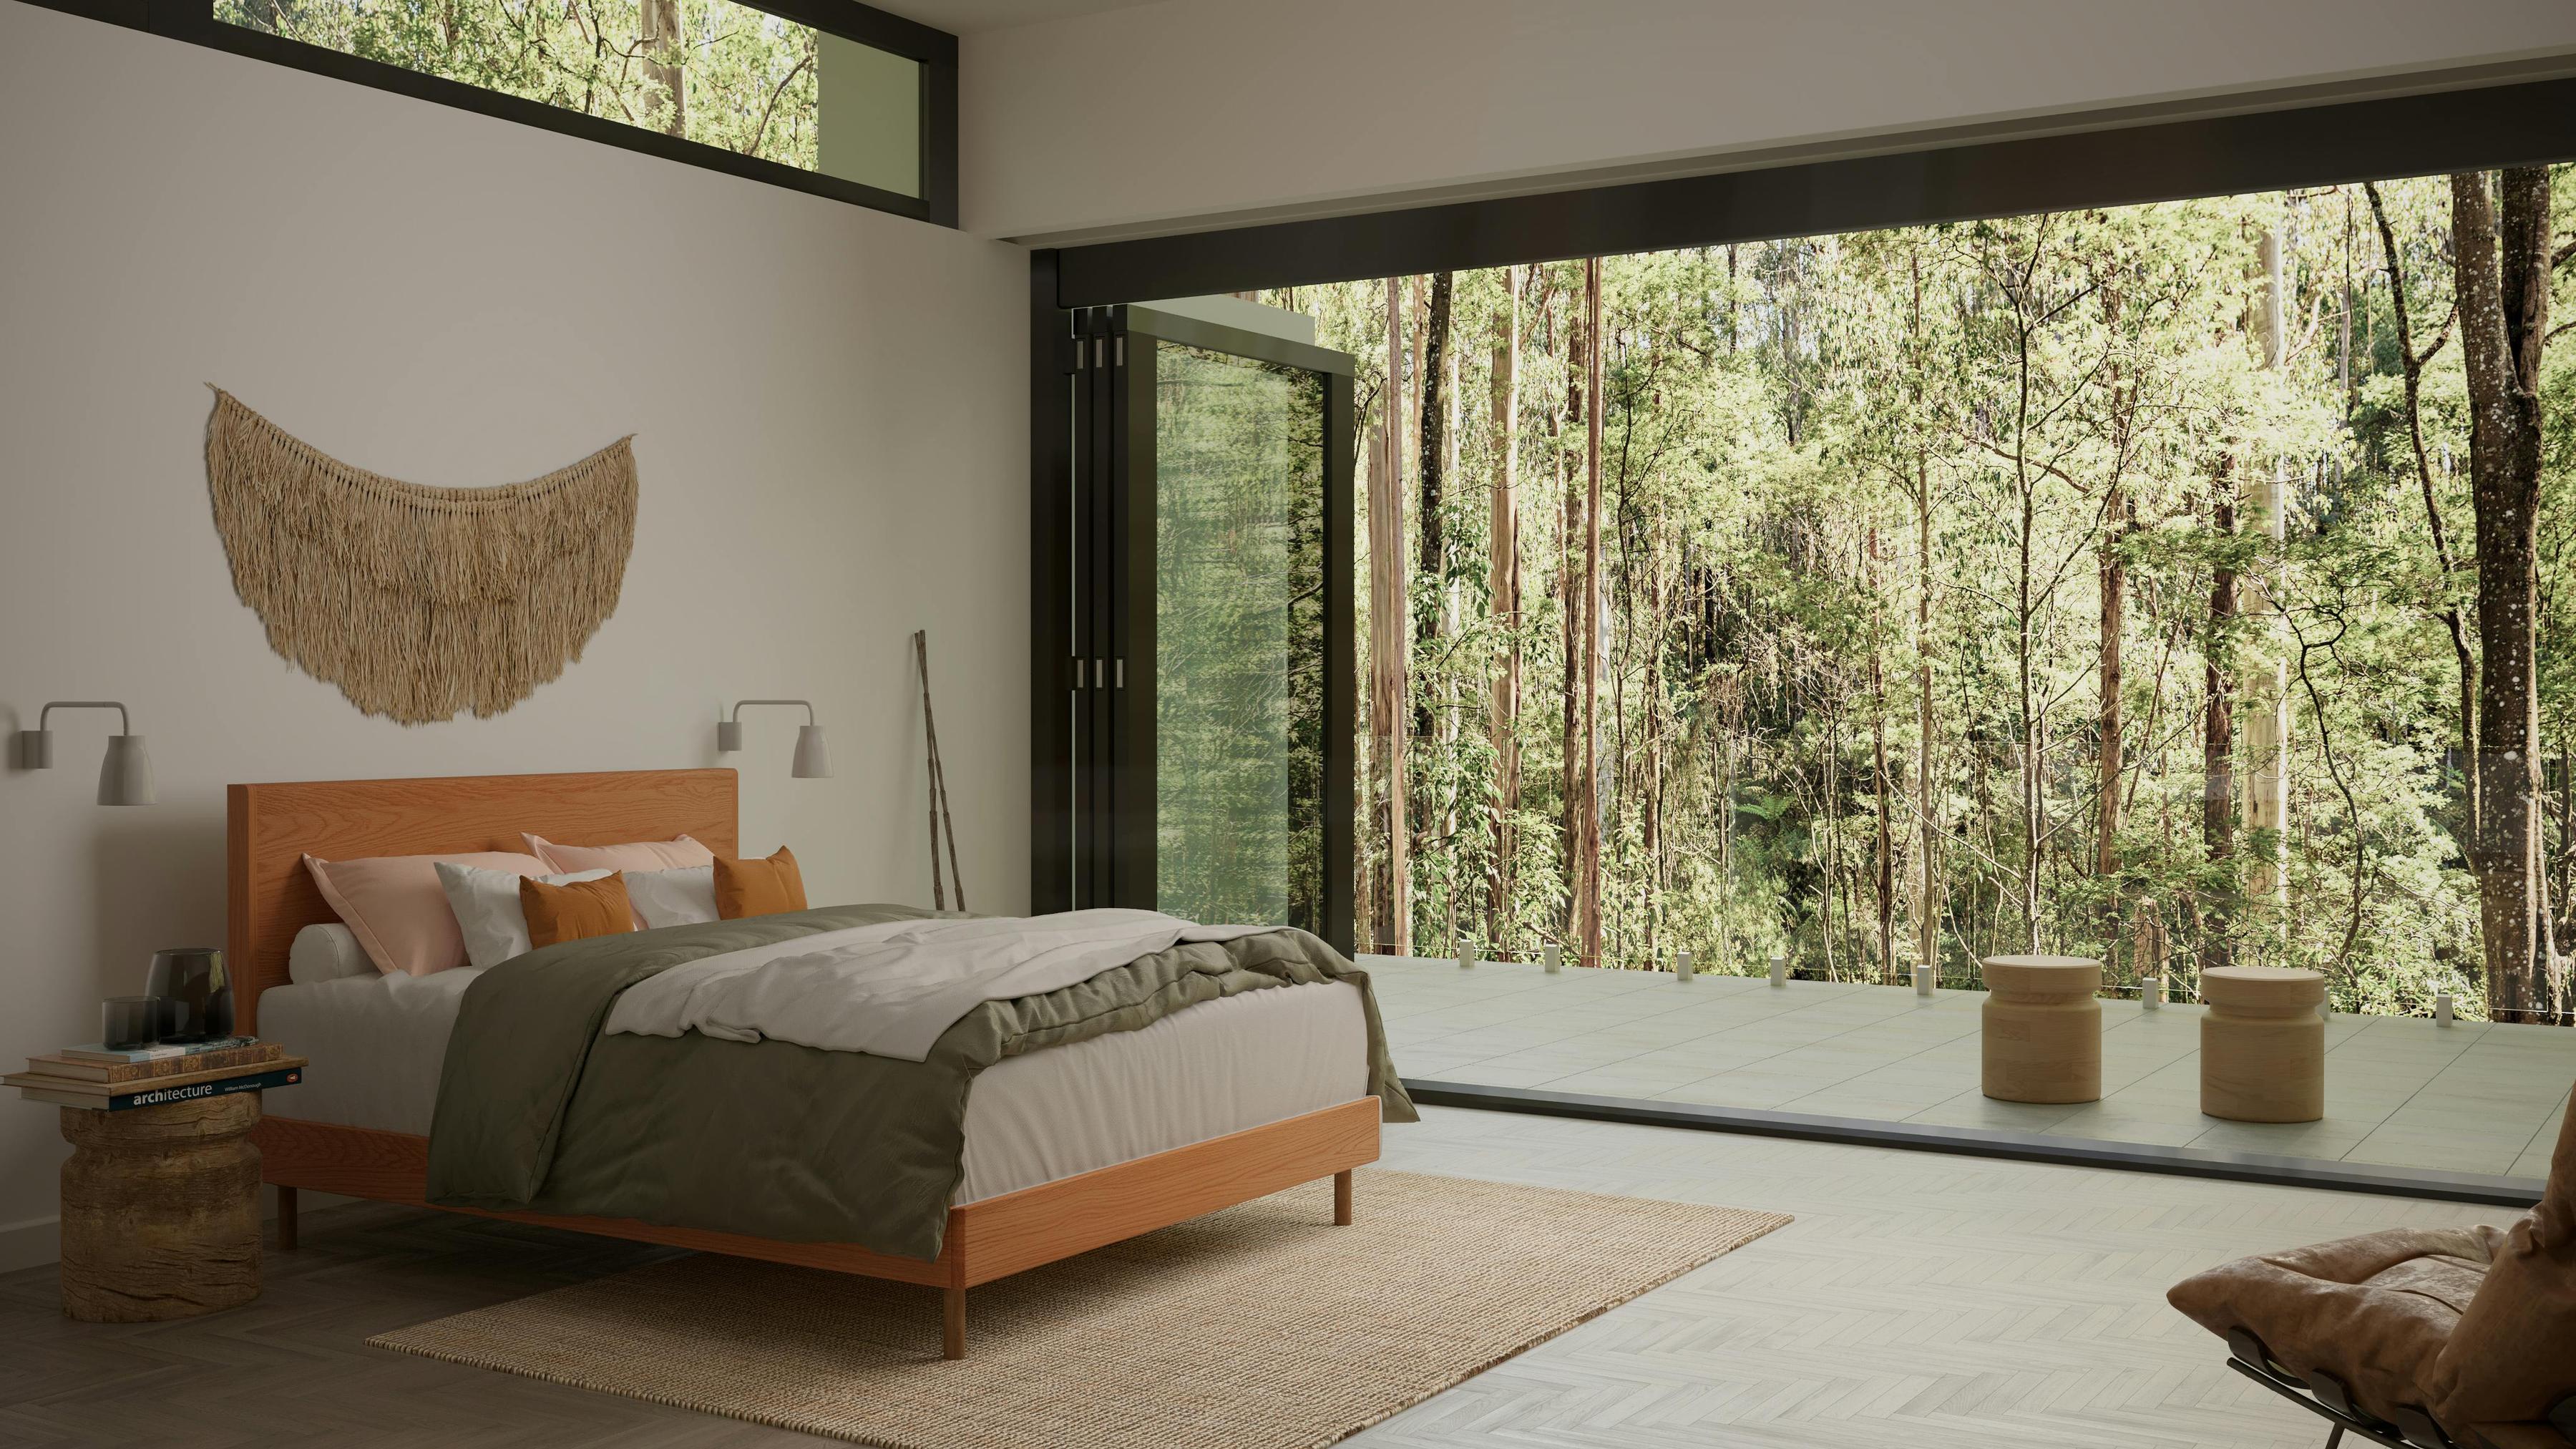 The Baker SD Indestruct Bed in European Oak, in a contemporary bedroom with organic accent decor, overlooking a lush Australian forest.